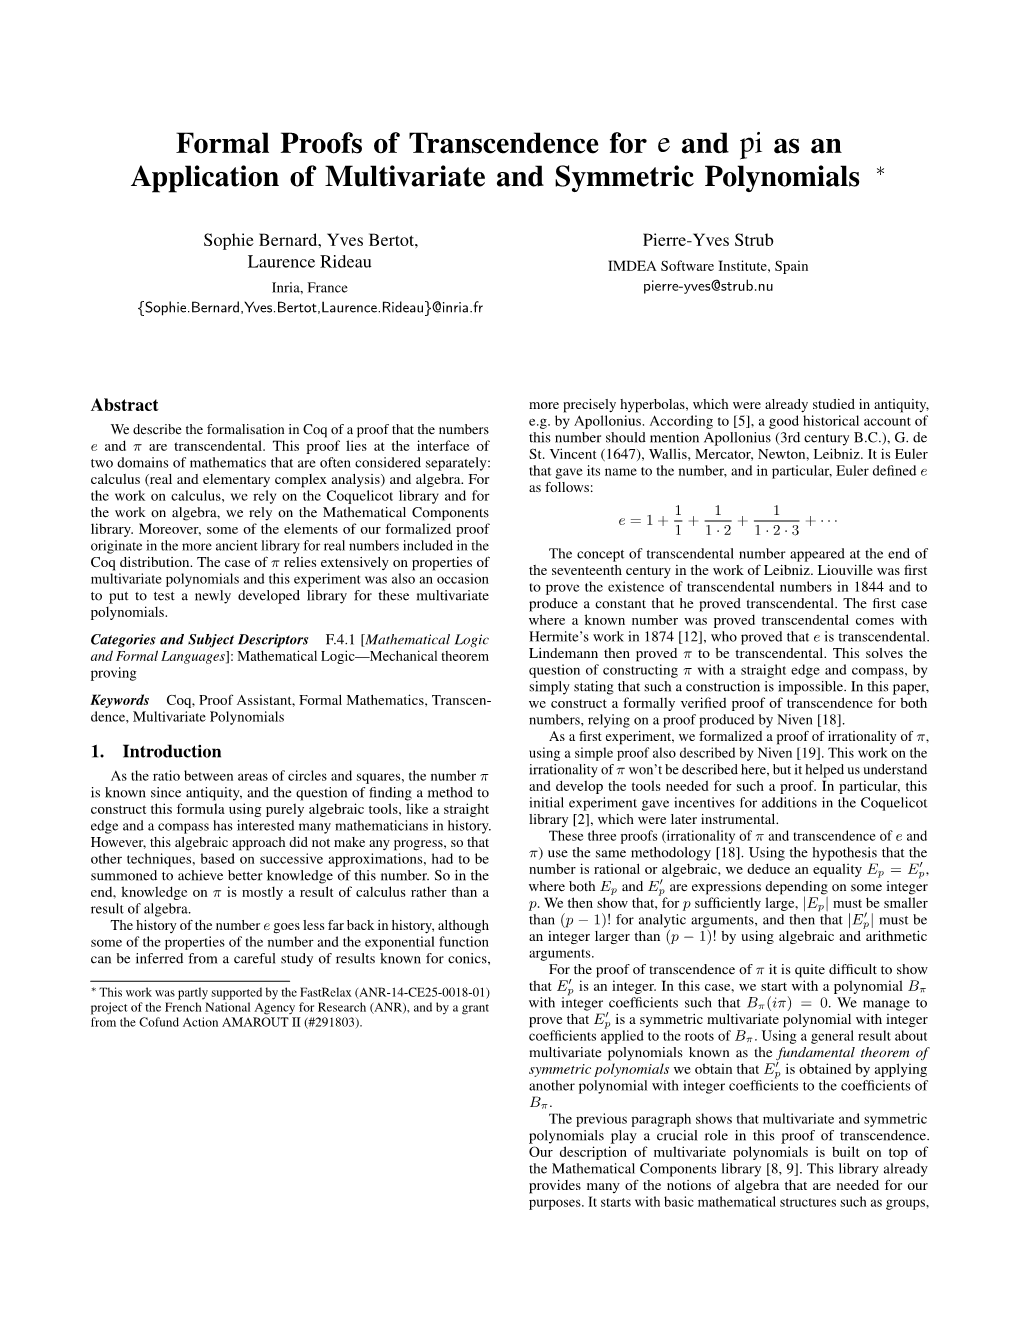 Formal Proofs of Transcendence for E and Pi As an Application of Multivariate and Symmetric Polynomials ∗